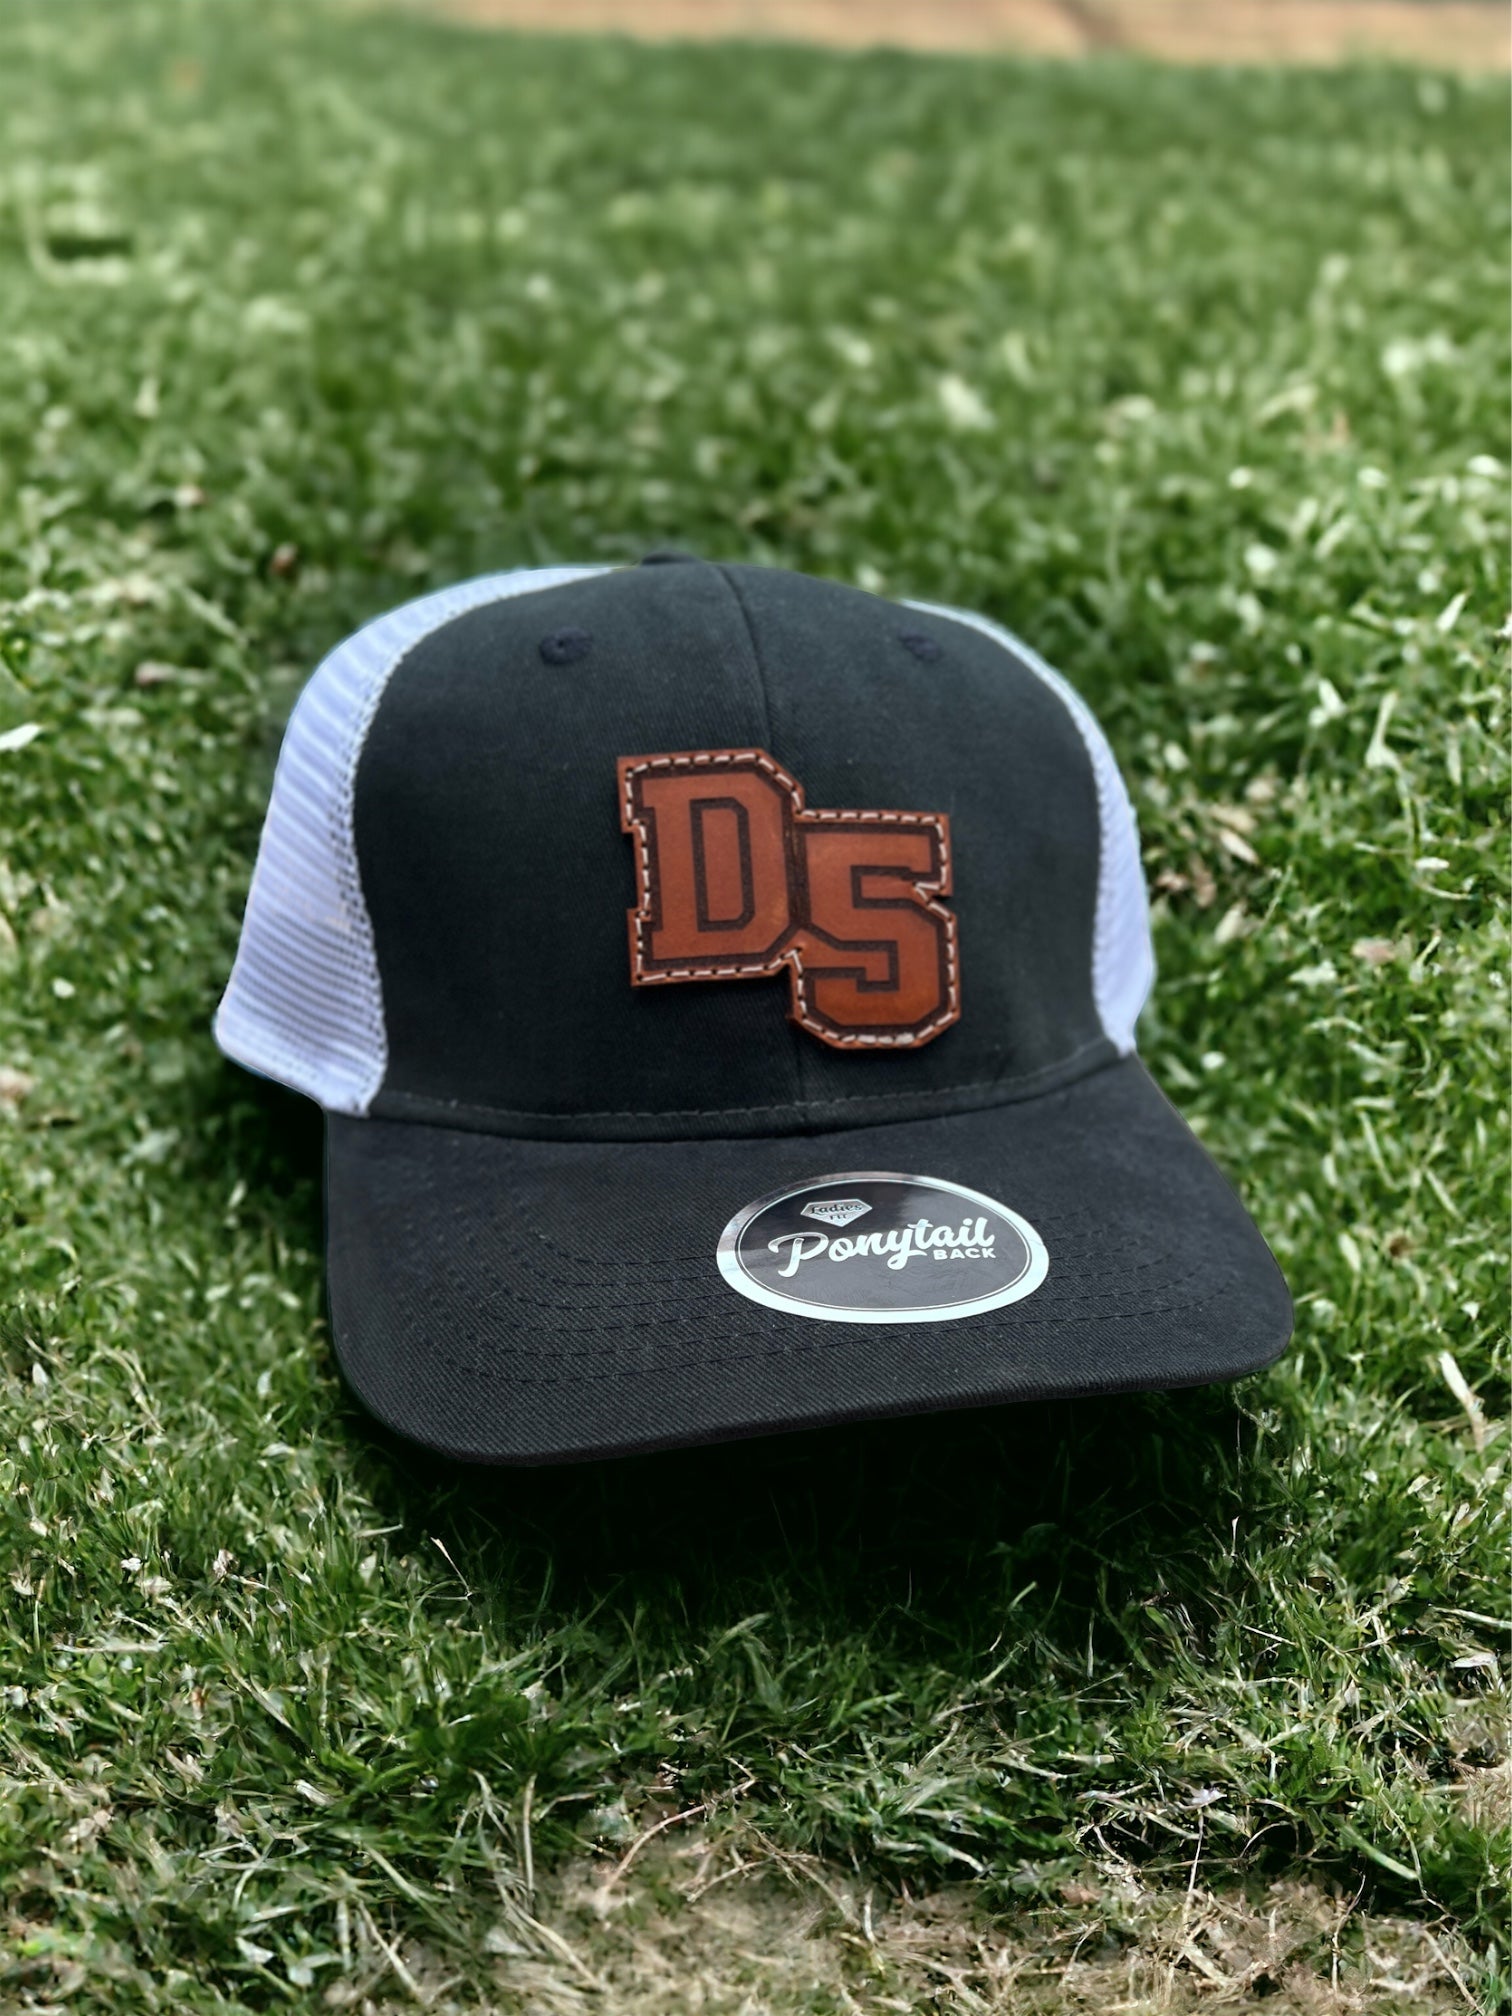 D5 Rebels Leather Patch Hat w/ Ponytail Mesh-Black/White